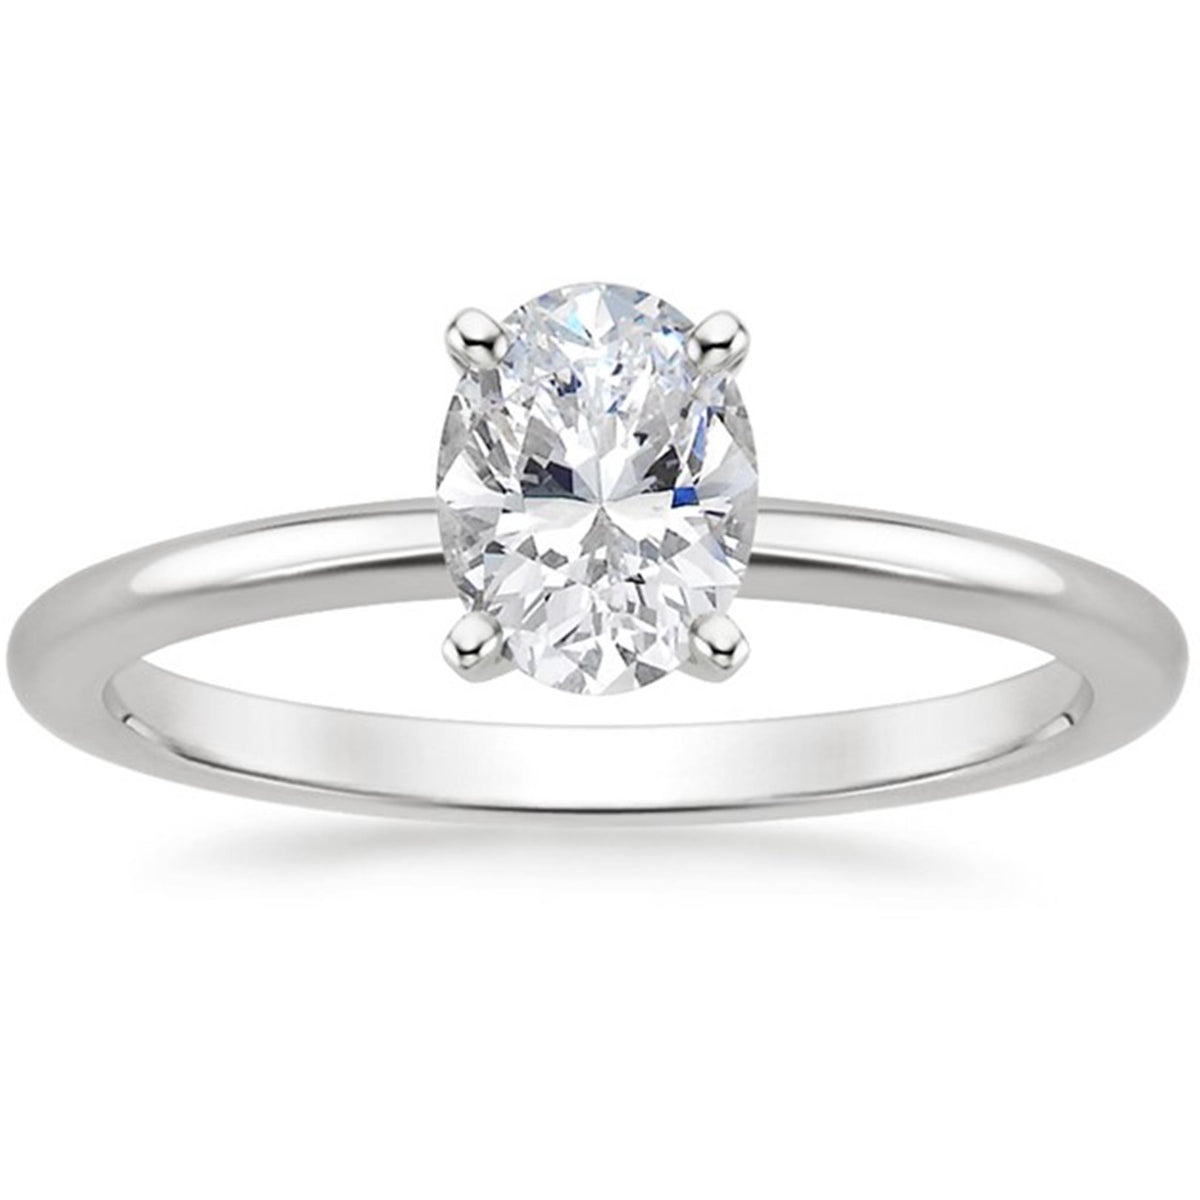 14Kt White Gold Solitaire Solitaire Ring With 1.11ct Lab-Grown Center Diamond